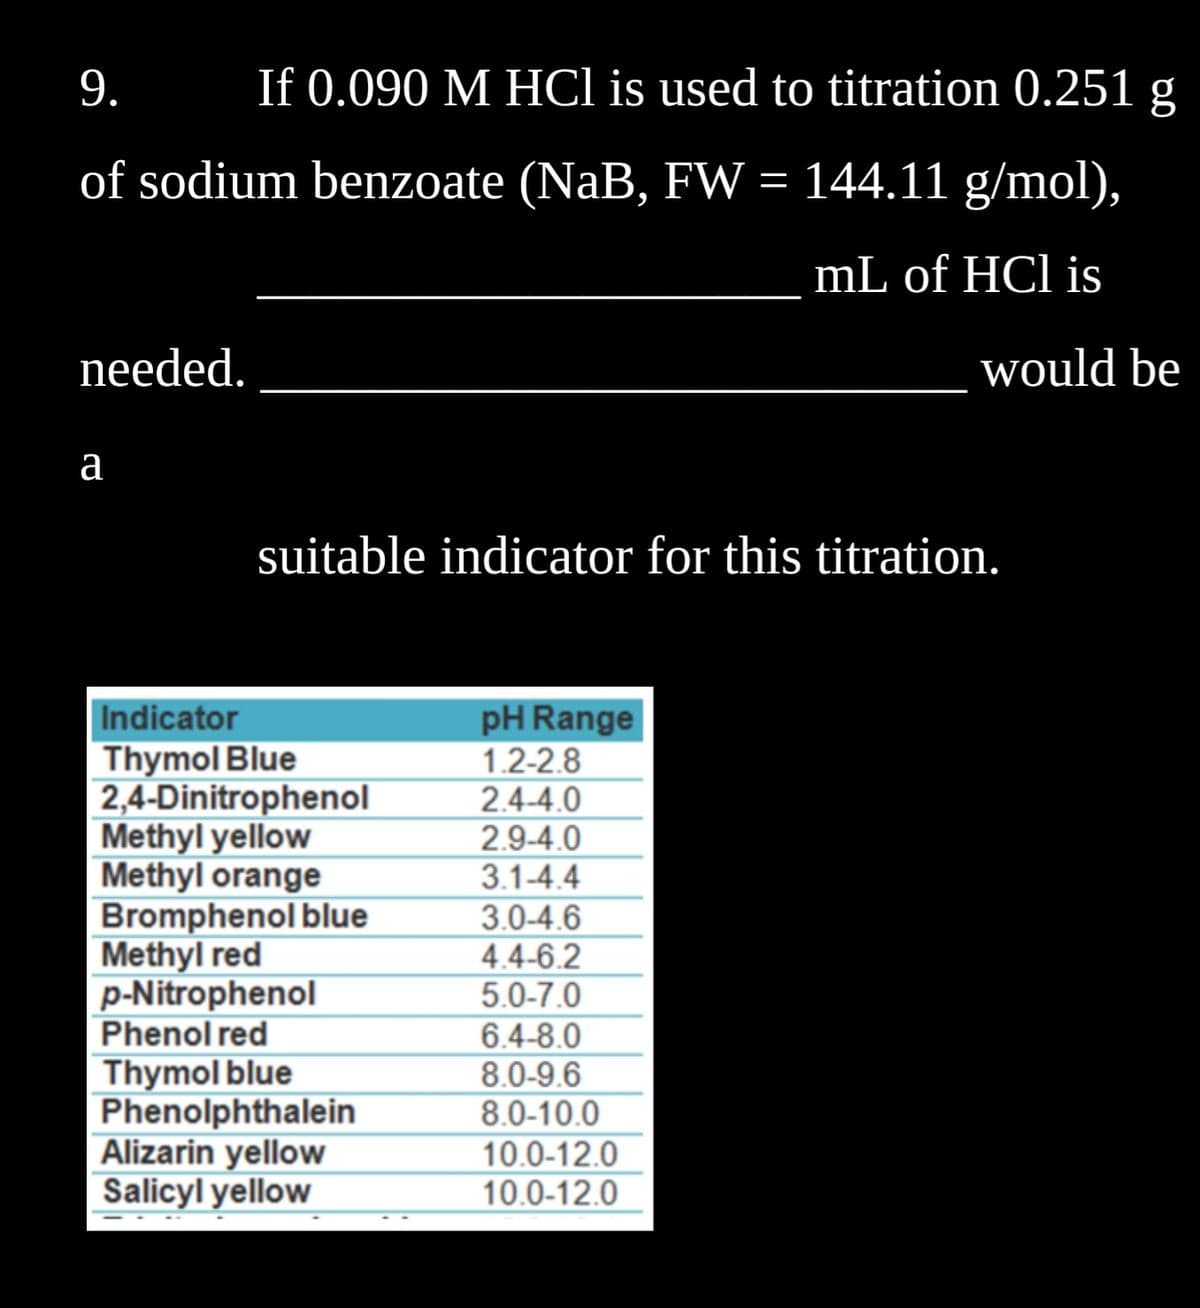 9.
If 0.090 M HCl is used to titration 0.251 g
of sodium benzoate (NaB, FW = 144.11 g/mol),
mL of HCl is
needed.
a
suitable indicator for this titration.
Indicator
Thymol Blue
2,4-Dinitrophenol
Methyl yellow
Methyl orange
Bromphenol blue
Methyl red
p-Nitrophenol
Phenol red
Thymol blue
Phenolphthalein
Alizarin yellow
Salicyl yellow
pH Range
1.2-2.8
2.4-4.0
2.9-4.0
3.1-4.4
3.0-4.6
4.4-6.2
5.0-7.0
6.4-8.0
8.0-9.6
8.0-10.0
would be
10.0-12.0
10.0-12.0